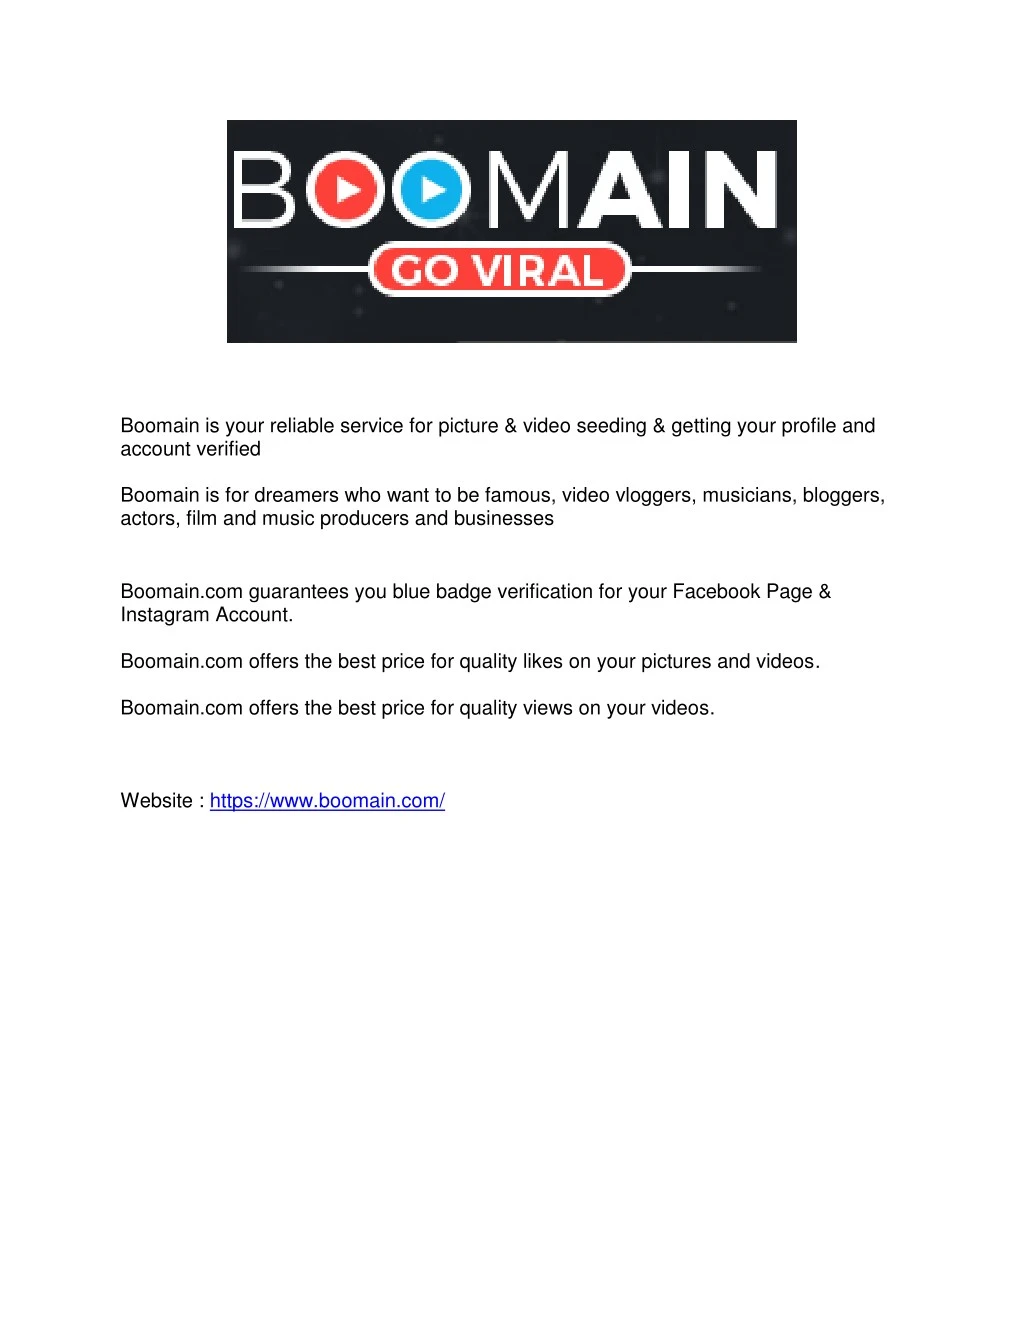 boomain is your reliable service for picture